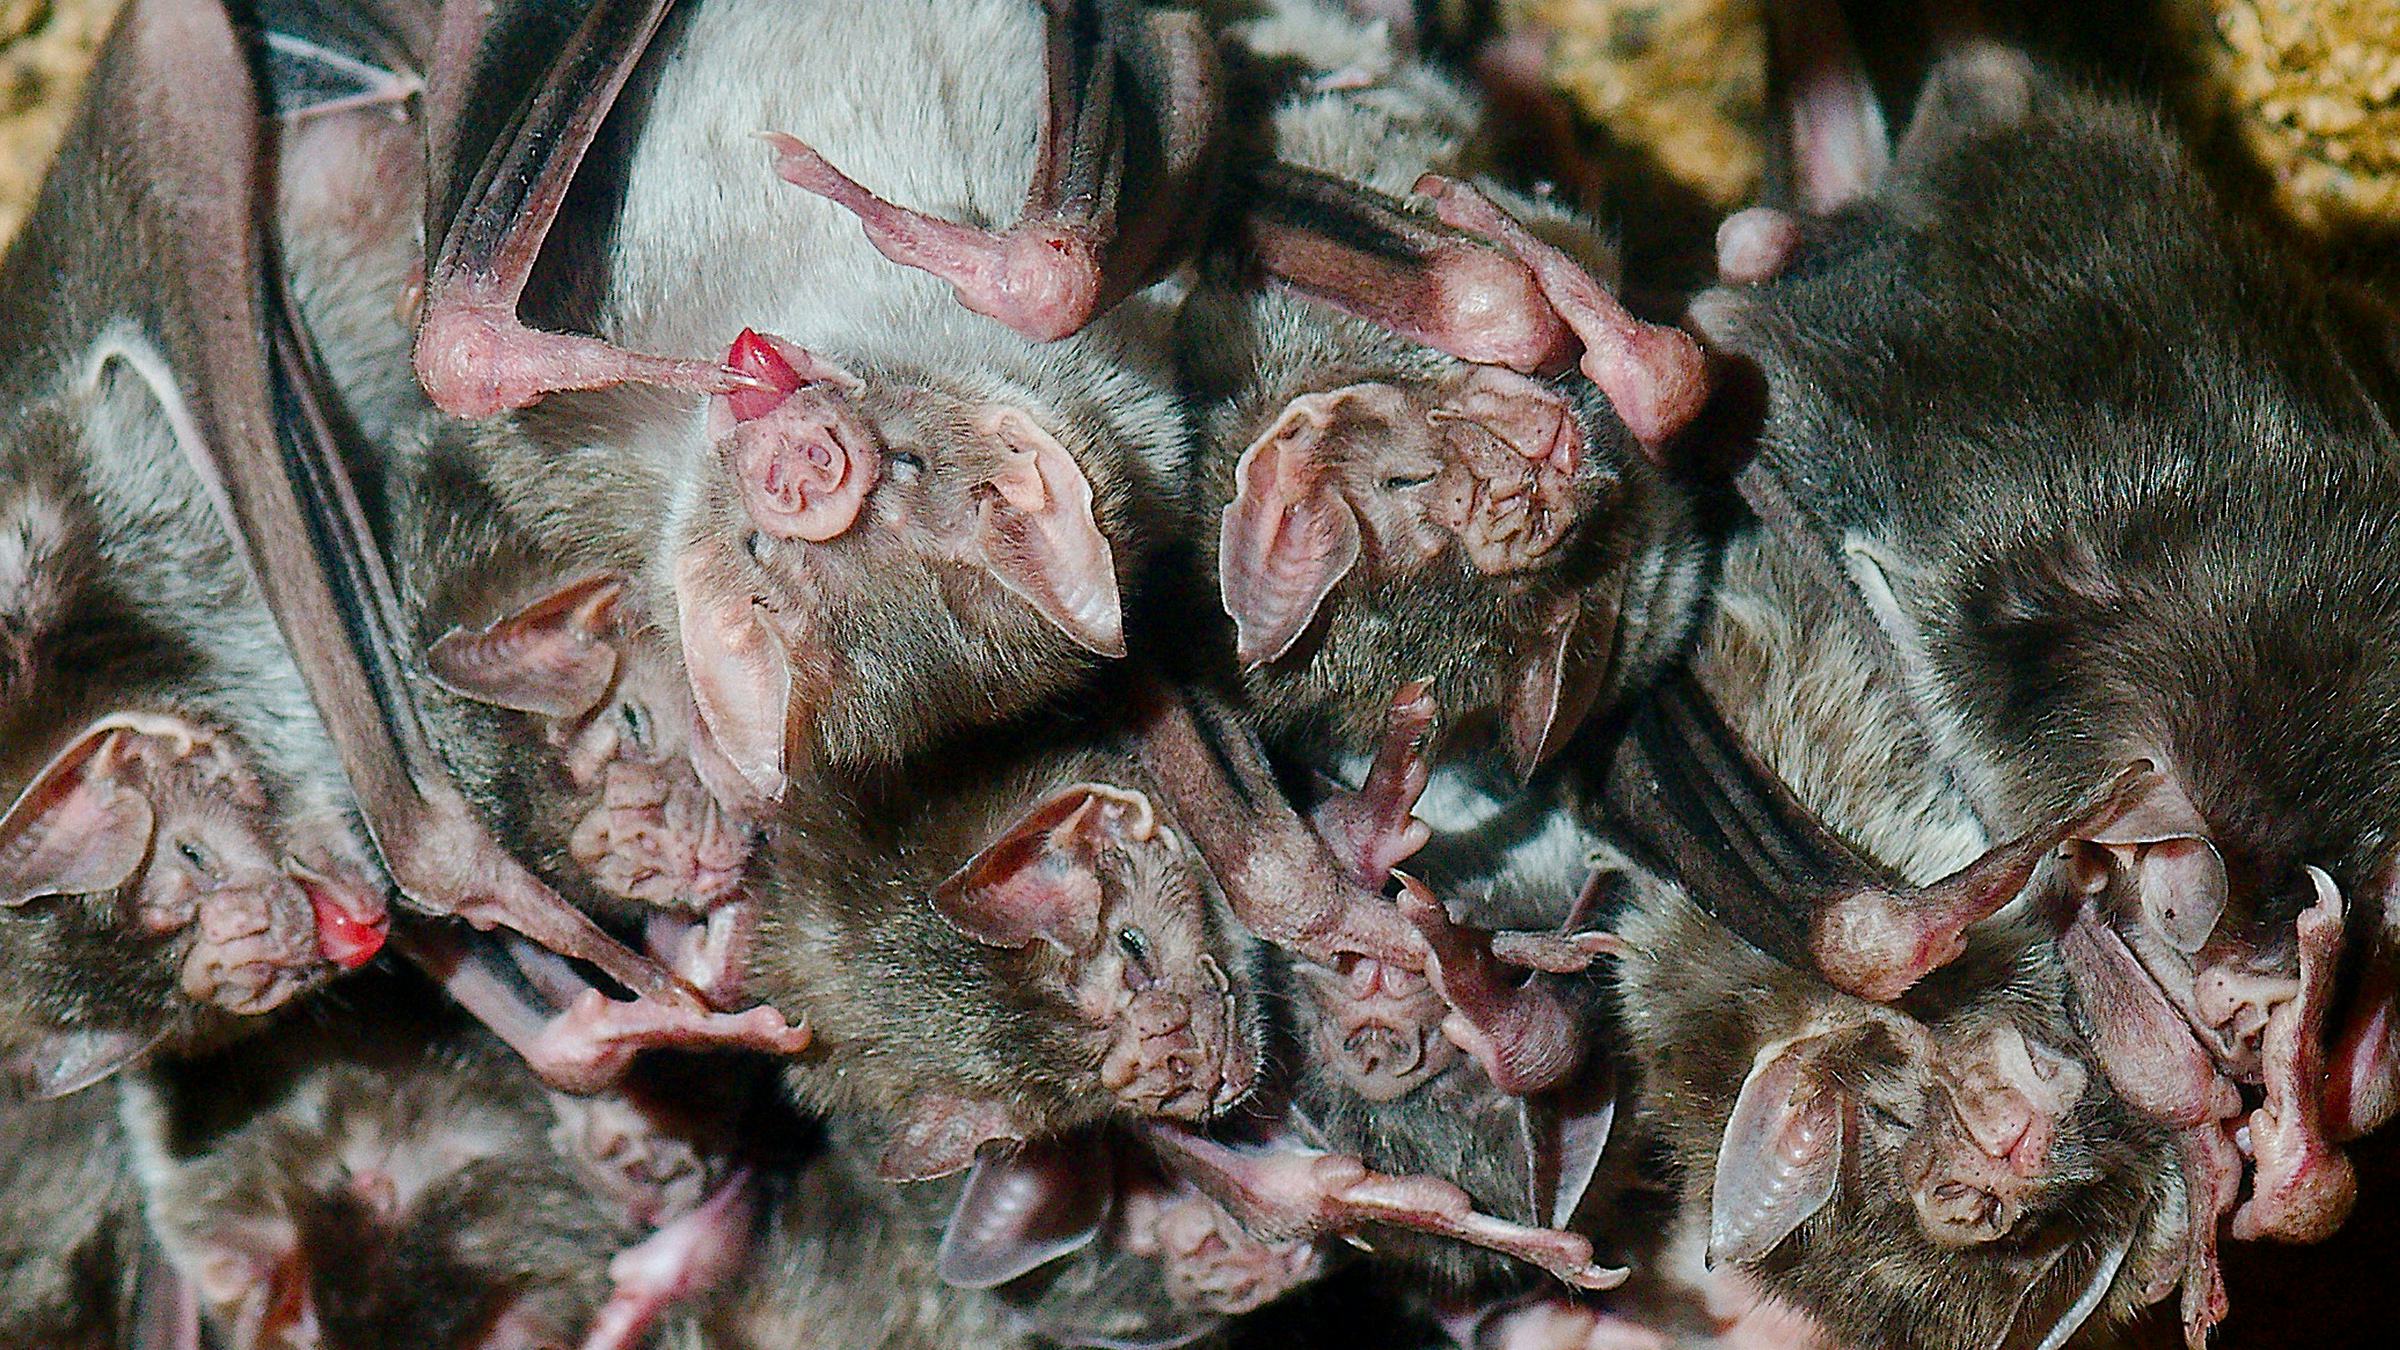 A group of common vampire bats just hanging around